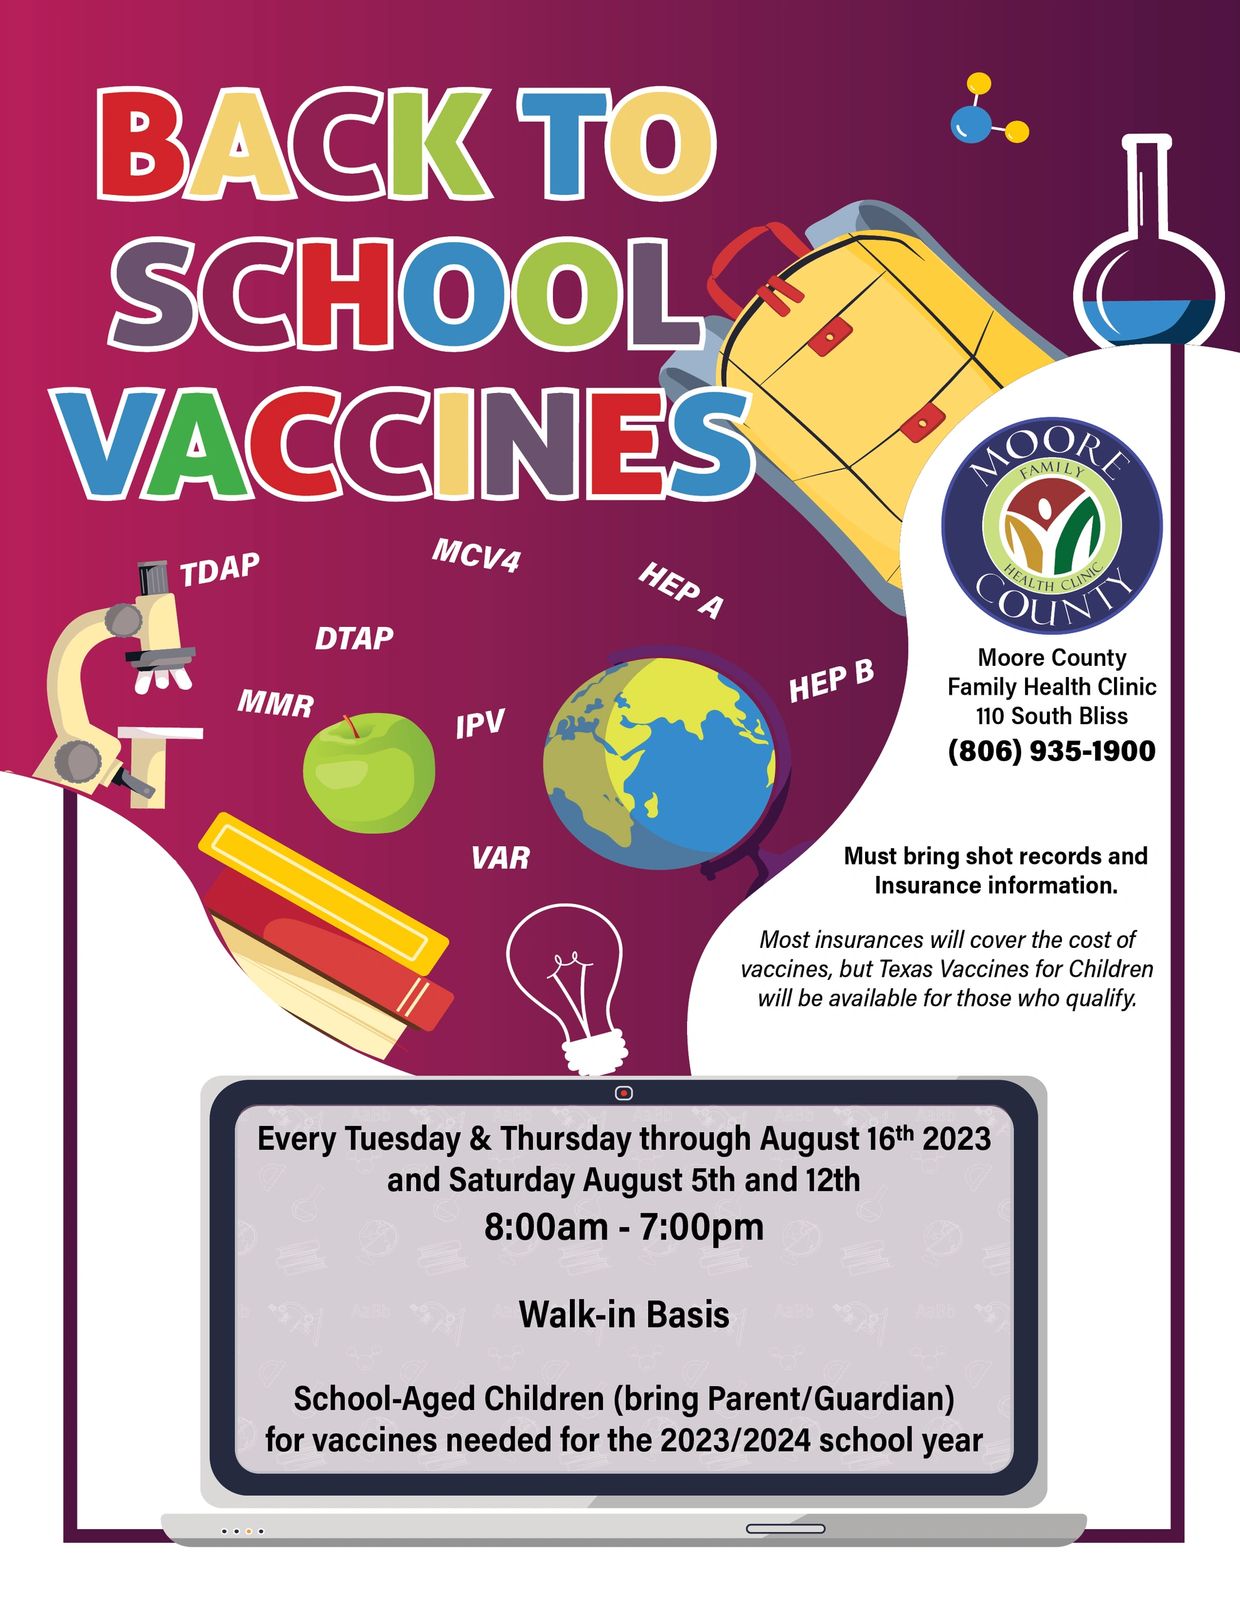 Image of a flyer with details of the back to school vaccines.  Information is also listed below.